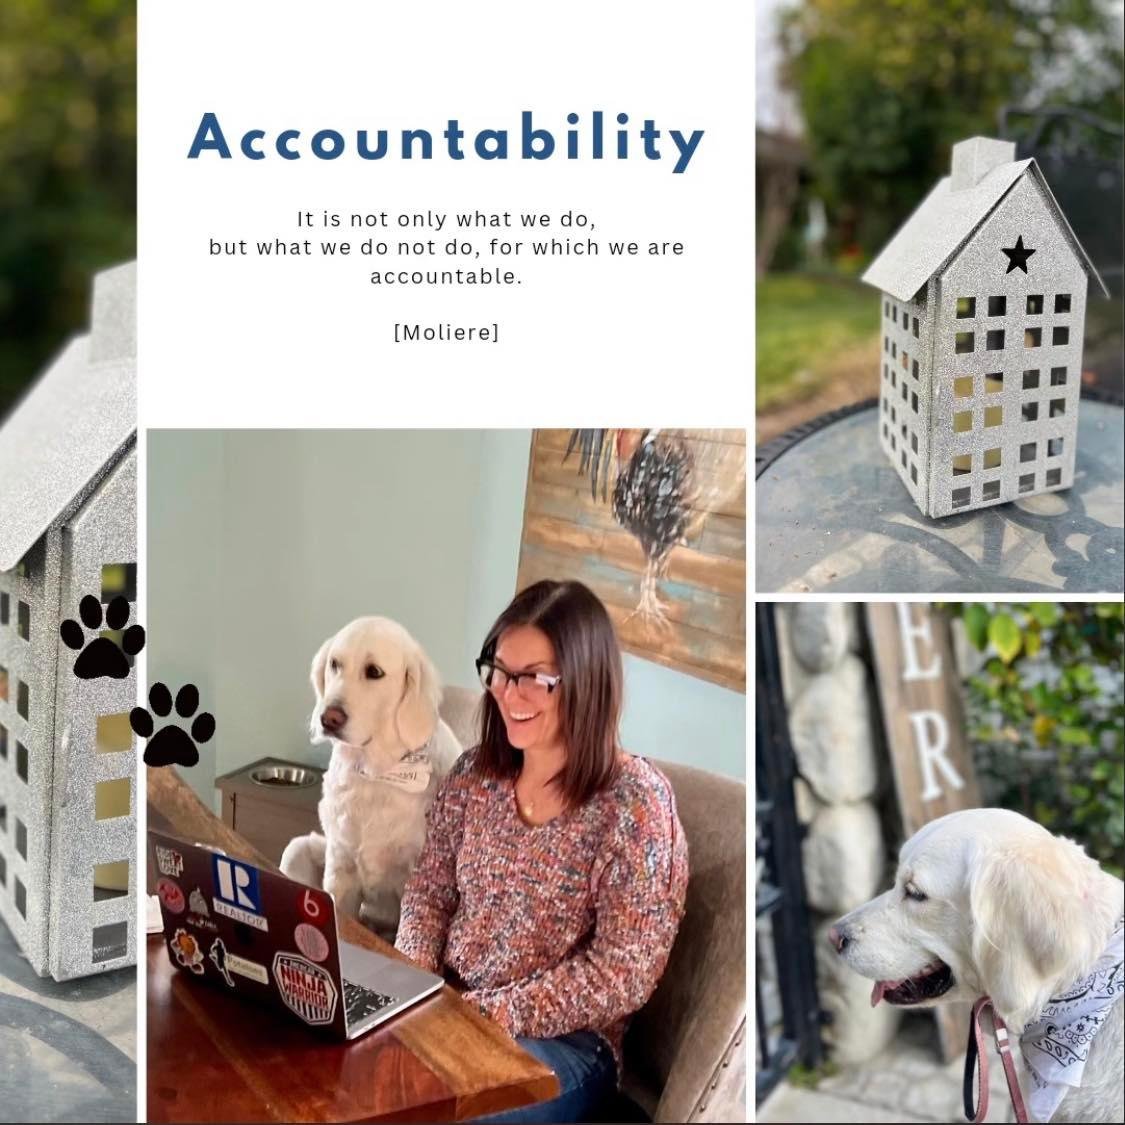 Sometimes, the best person to hold you accountable is not a person, but a furry friend... Honeygirl! 🥰.
Who is your accountability partner? 🤝
#accountability #Accountabilitypartner #Workinghard #RealtorWithACause #YourRealtorforTheHolidays